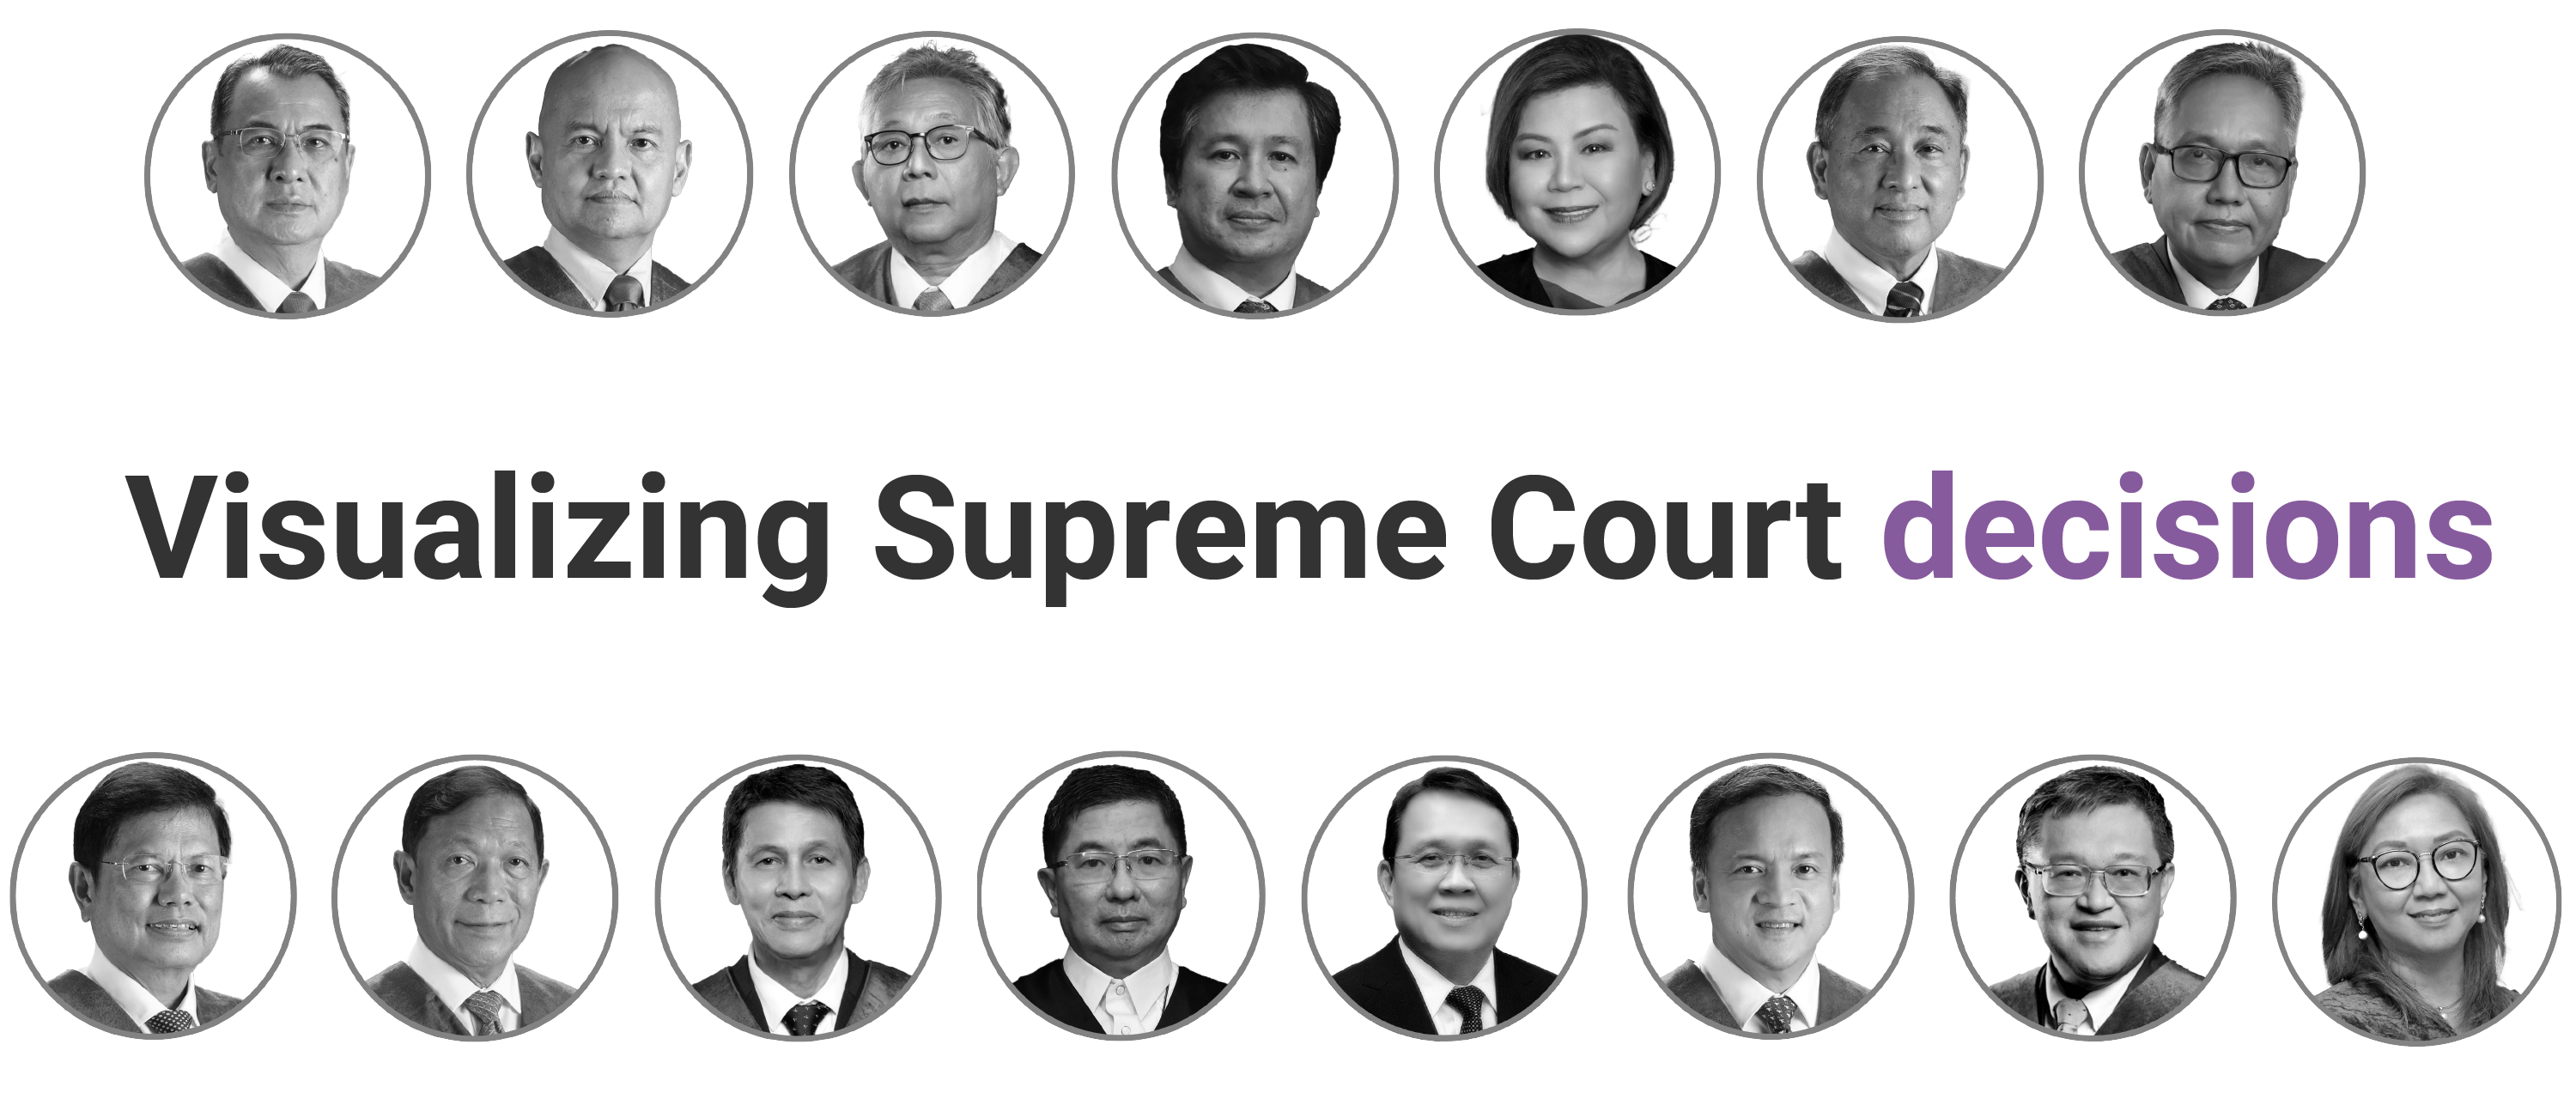 Title page cover that has the headshots of the current 15 Supreme Court justices of the Philippines and a title page that reads Visualizing Supreme Court decisions.